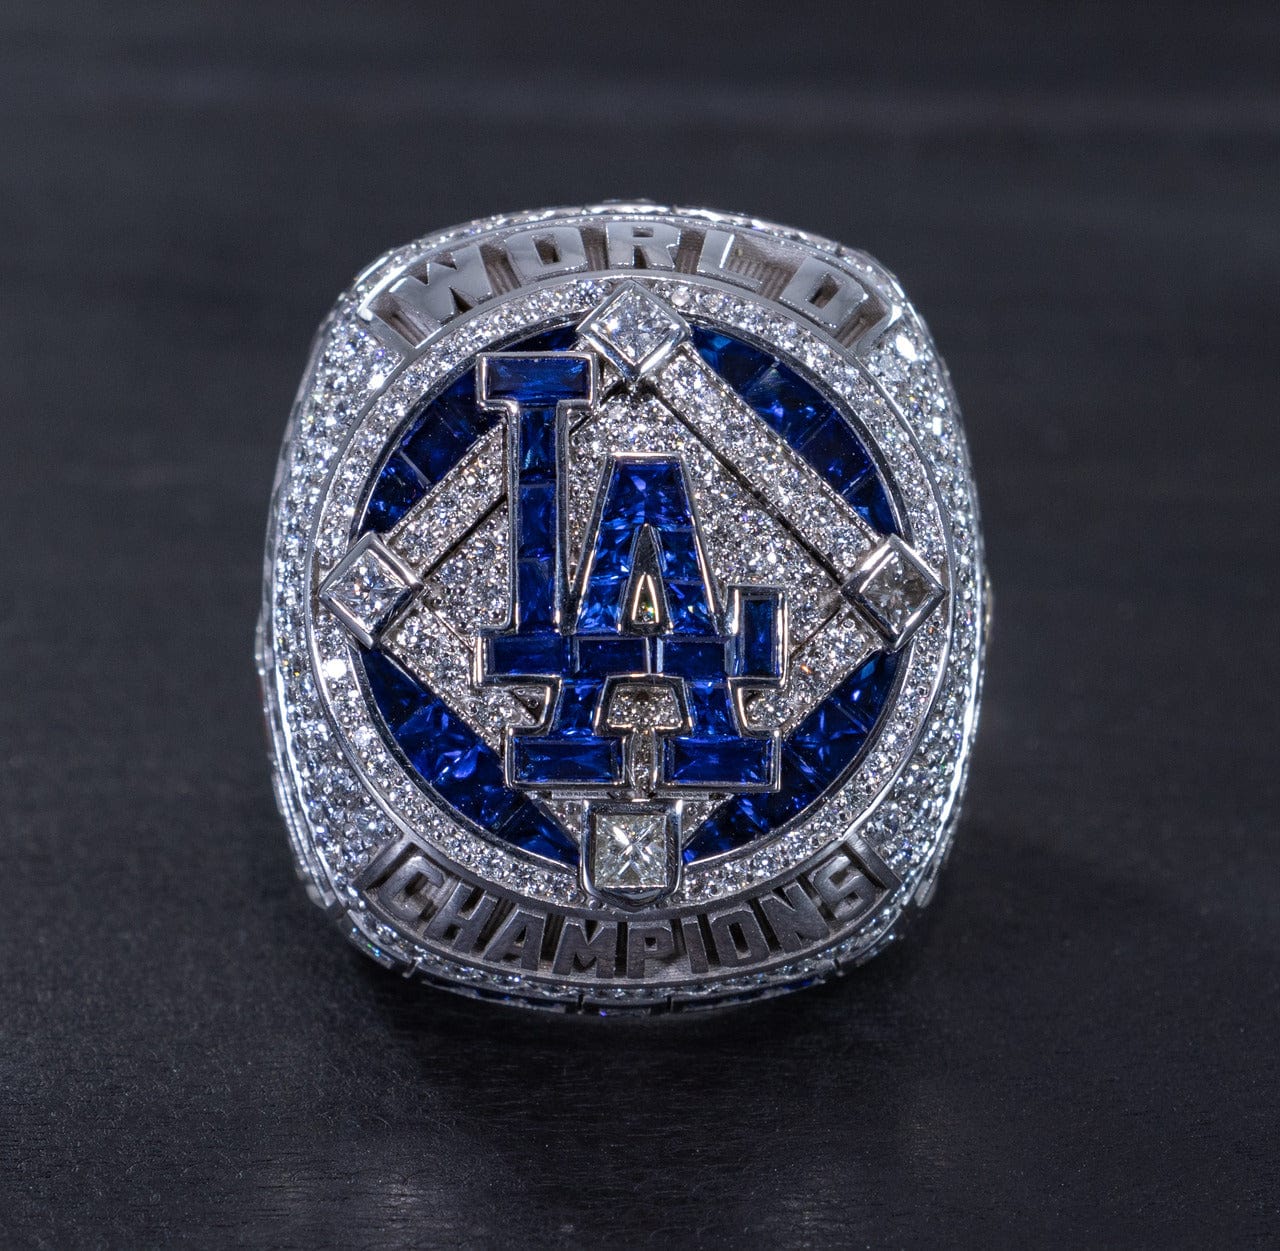 2020 Dodgers Championship Ring Front